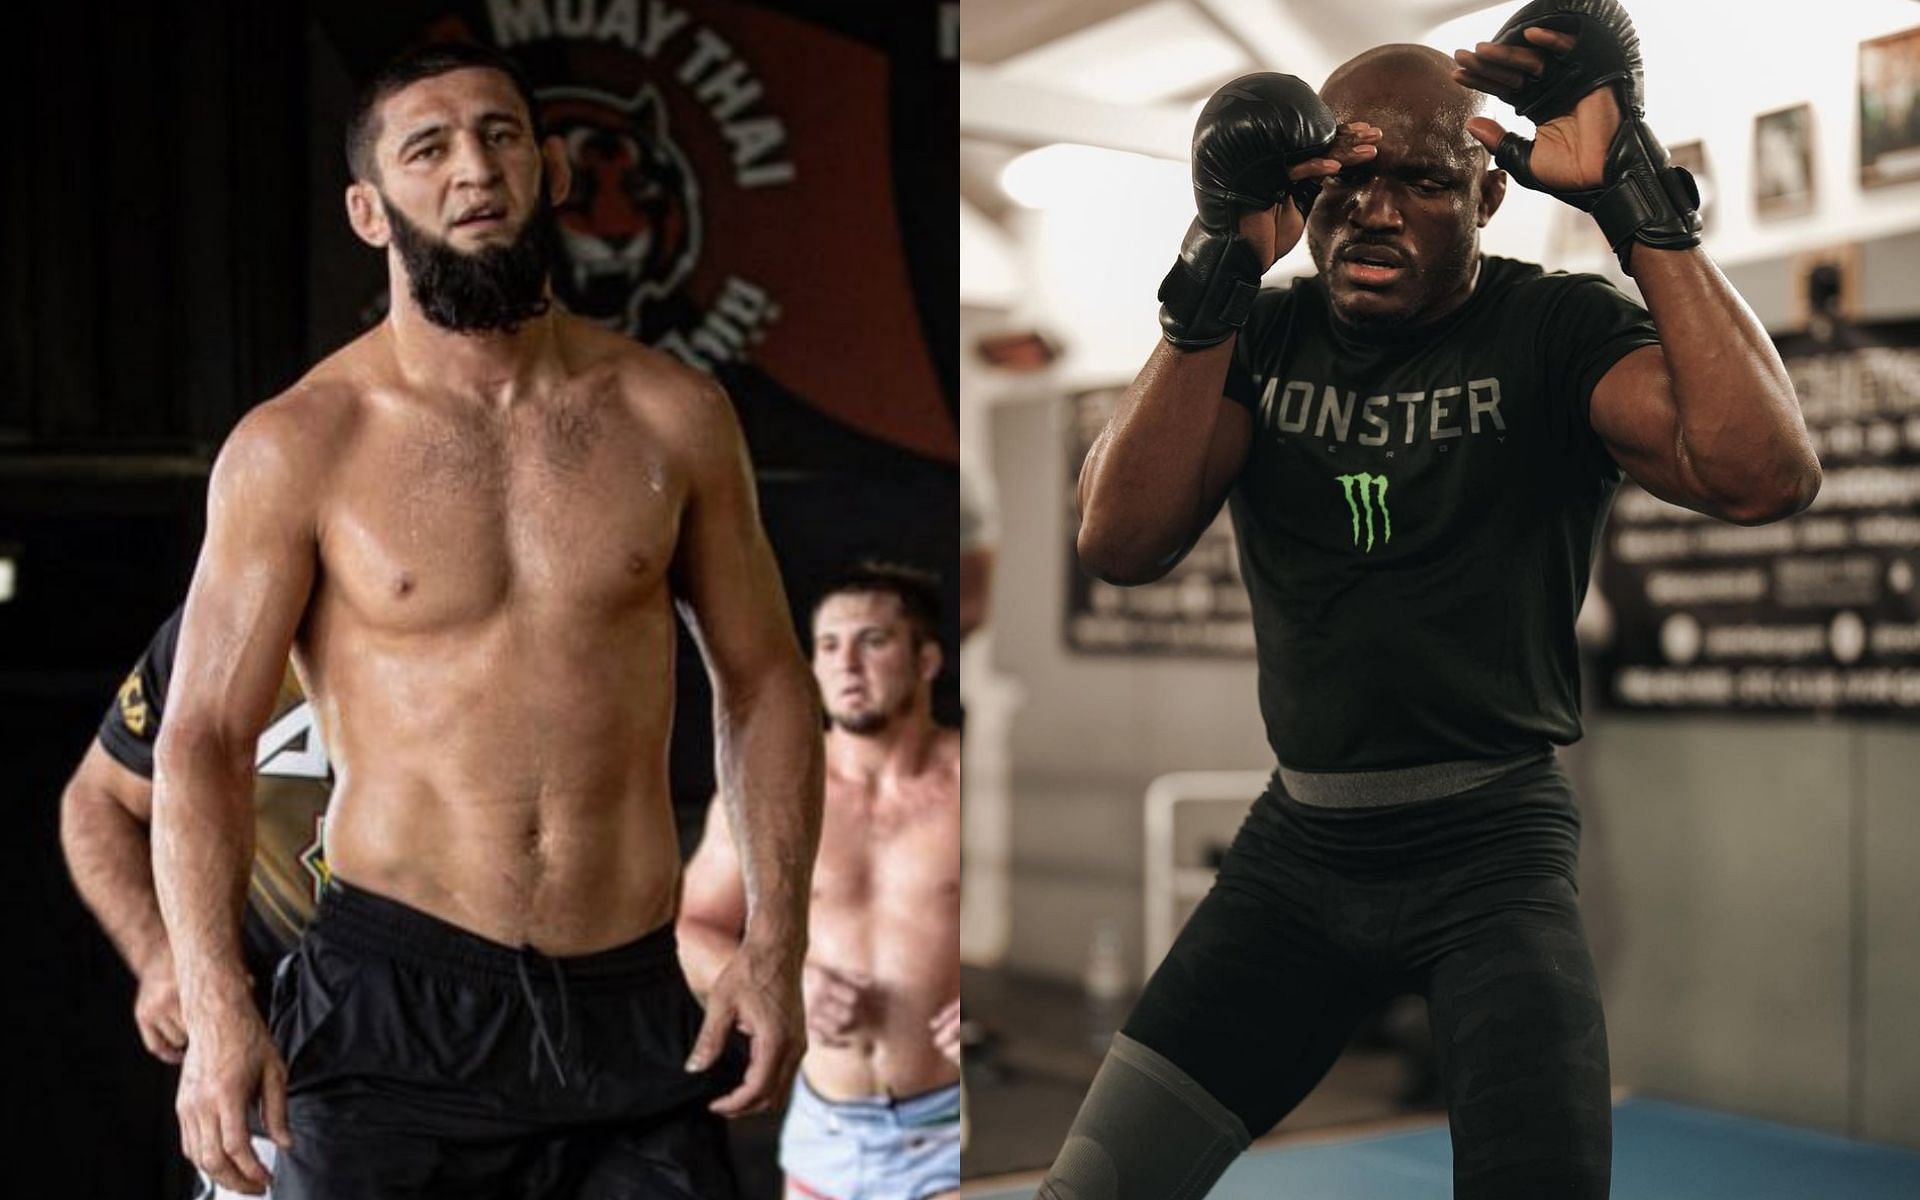 Khamzat Chimaev (left) rips into Kamaru Usman (right) for downplaying his win [Images courtesy of @kmatzat_chimaev and @usman84kg on Instagram]